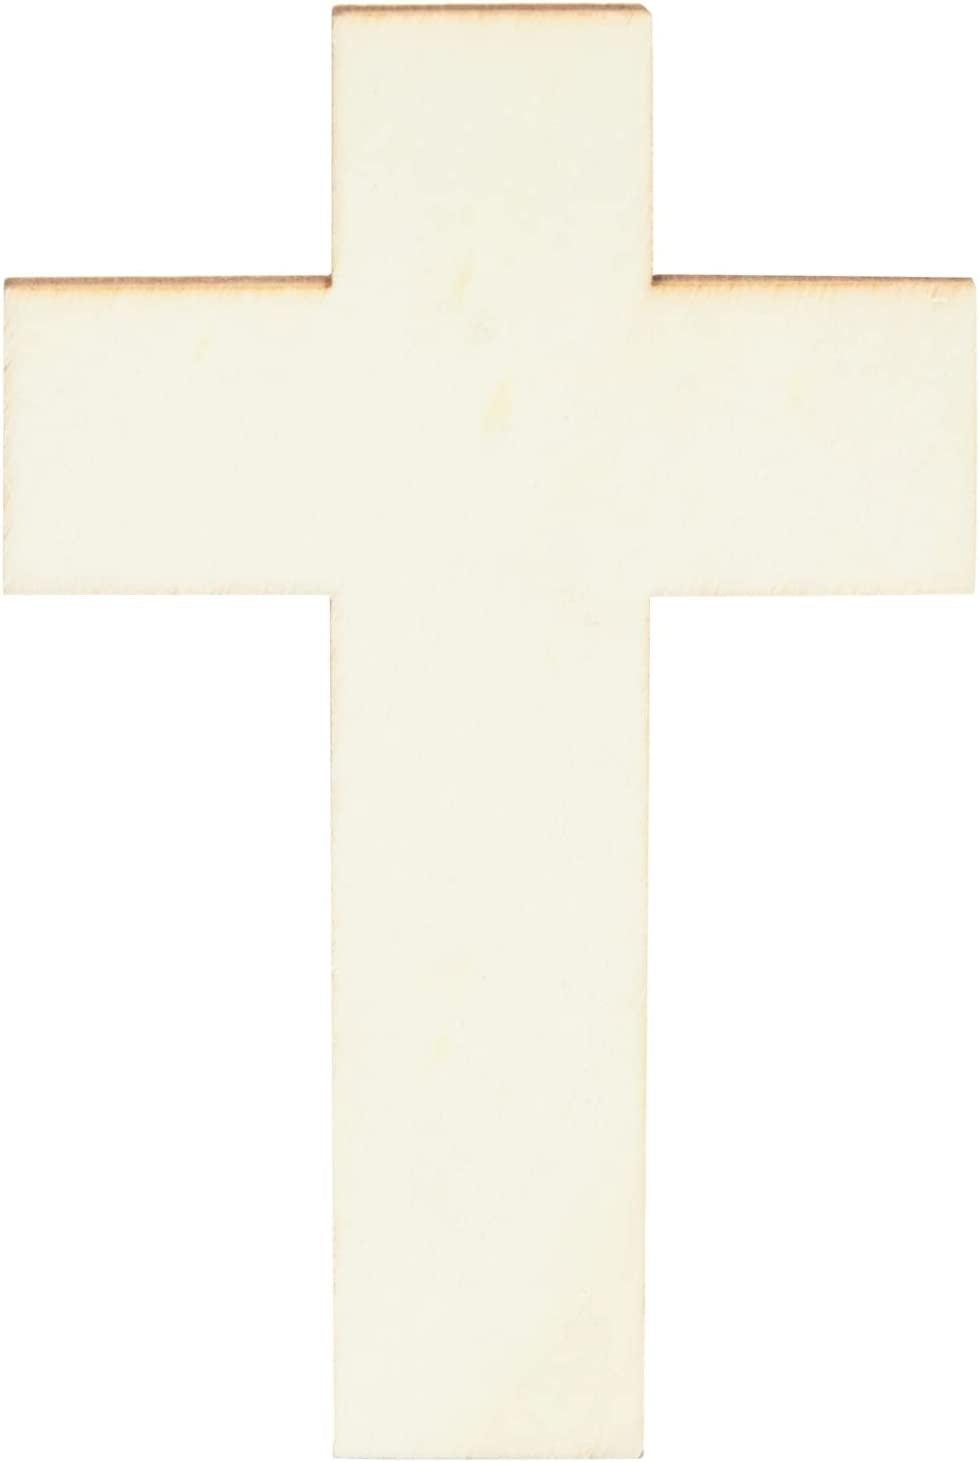 Unfinished Wood Cutout - 100-Pack Classic Cross Shaped Wood Pieces for  Wooden Craft DIY Projects, Sunday School, Church, Home Decoration, 4.1 x  2.6 x 0.1 Inches